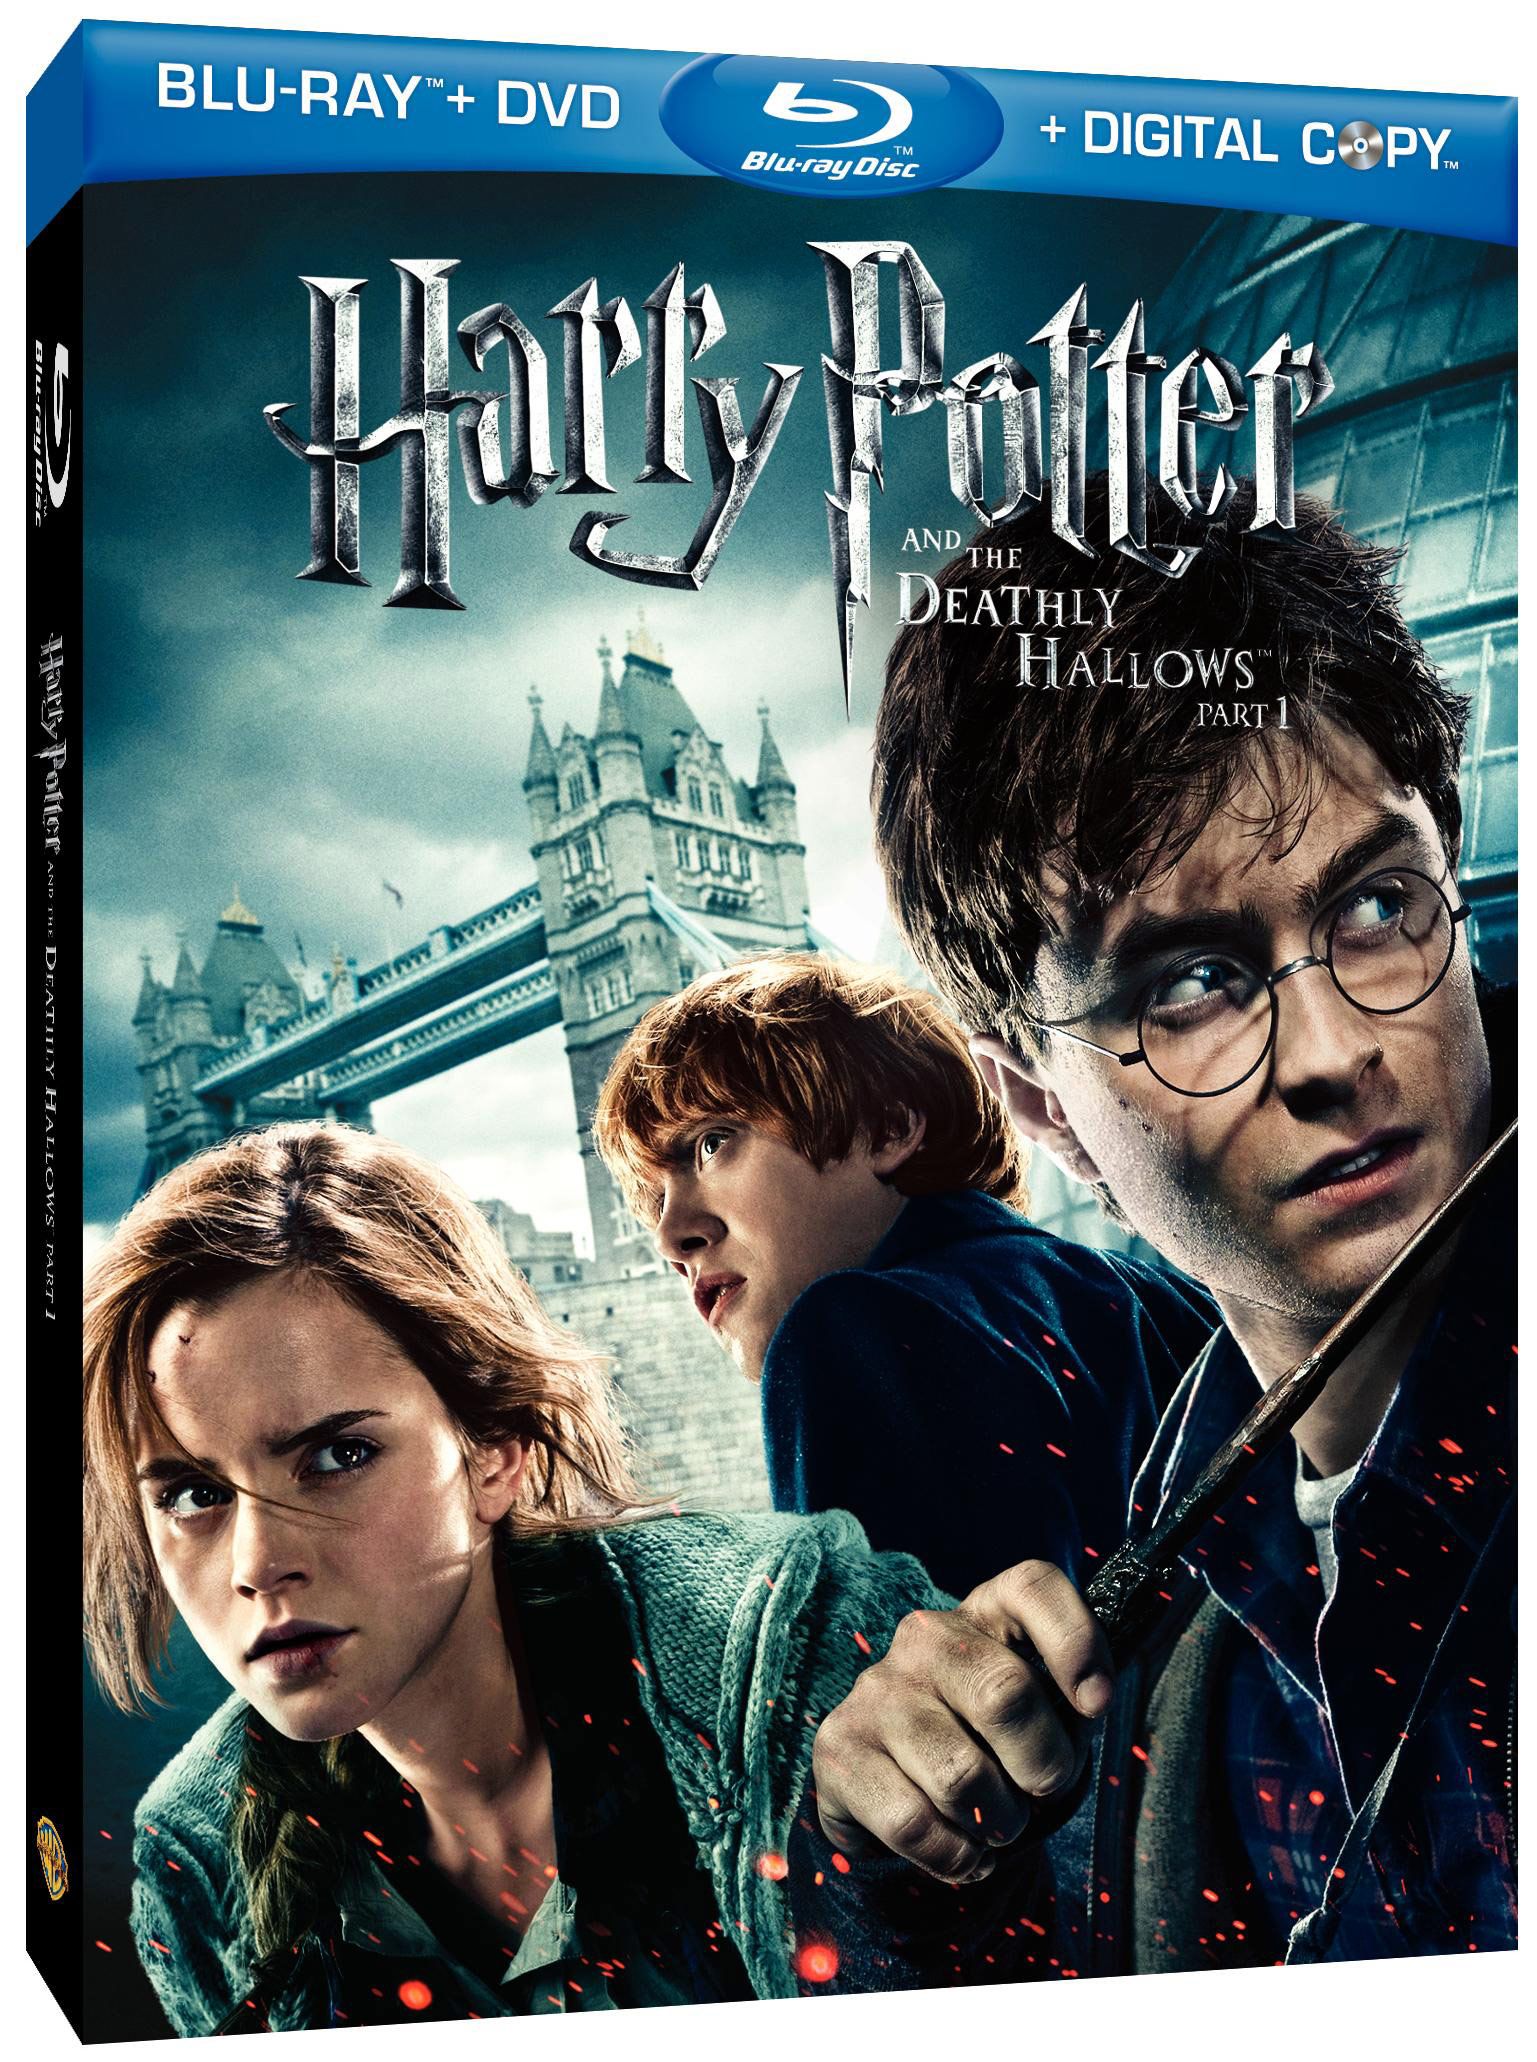 Harry Potter and the Deathly Hallows - Part 1 Blu-ray Art